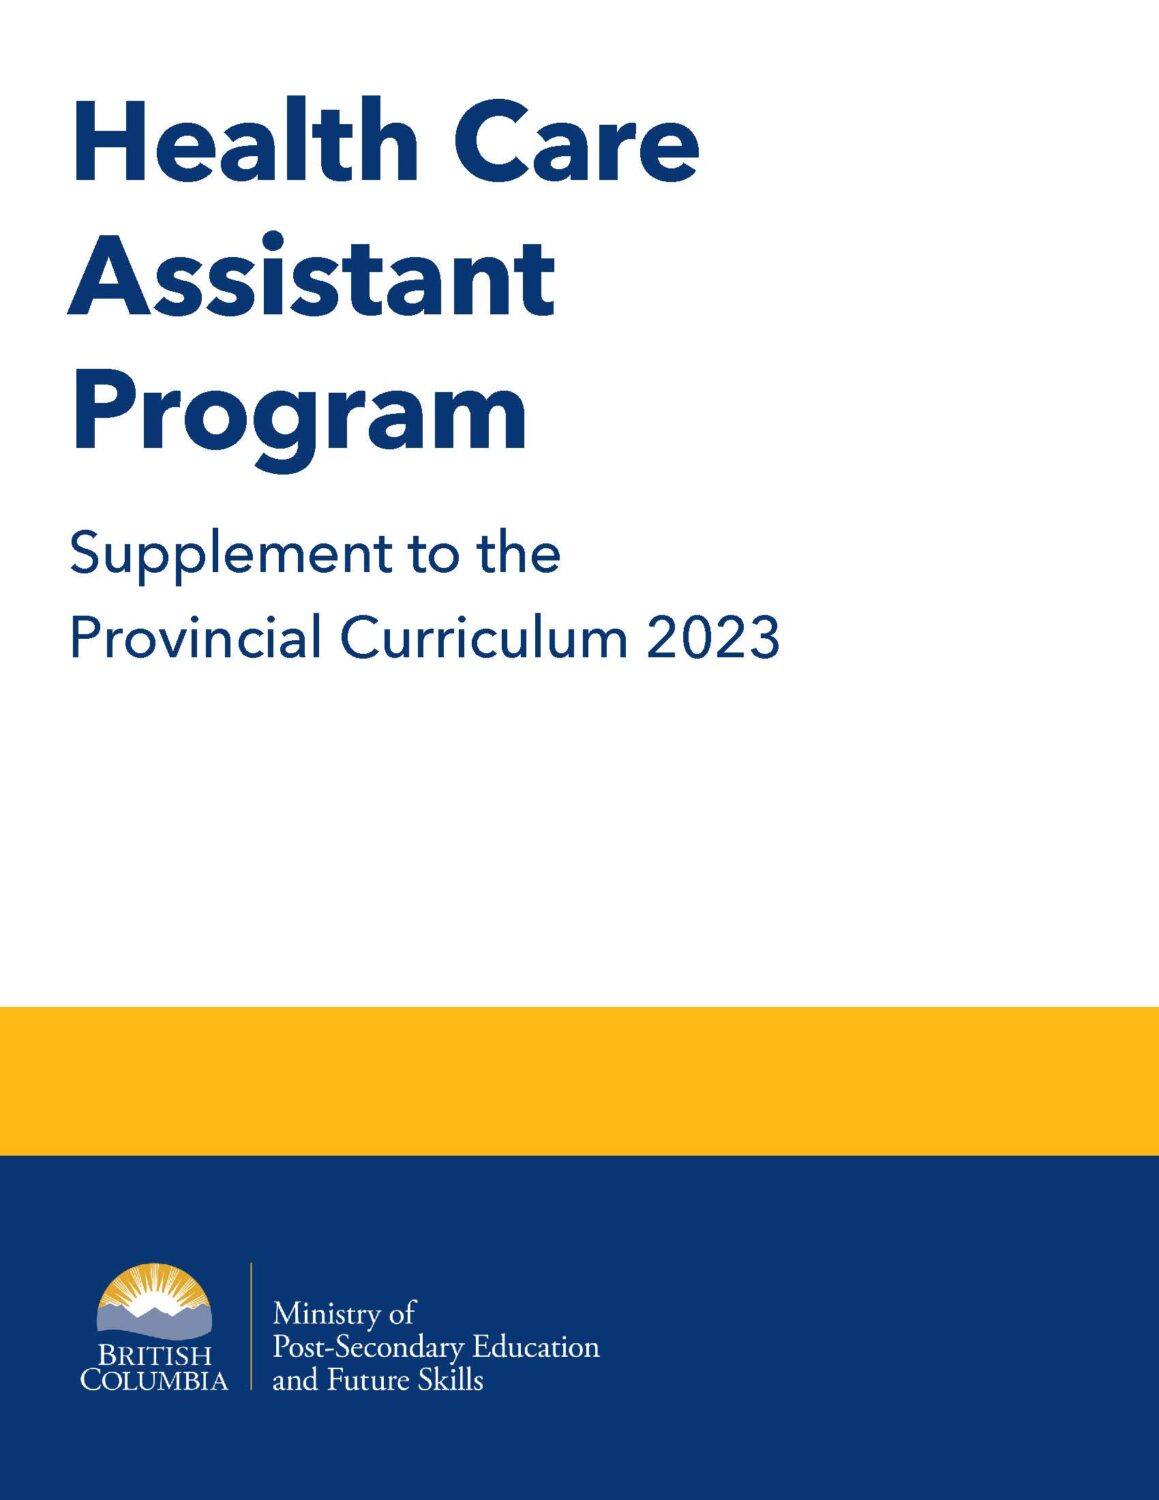 Cover image for Health Care Assistant Program Supplement to the Provincial Curriculum 2023